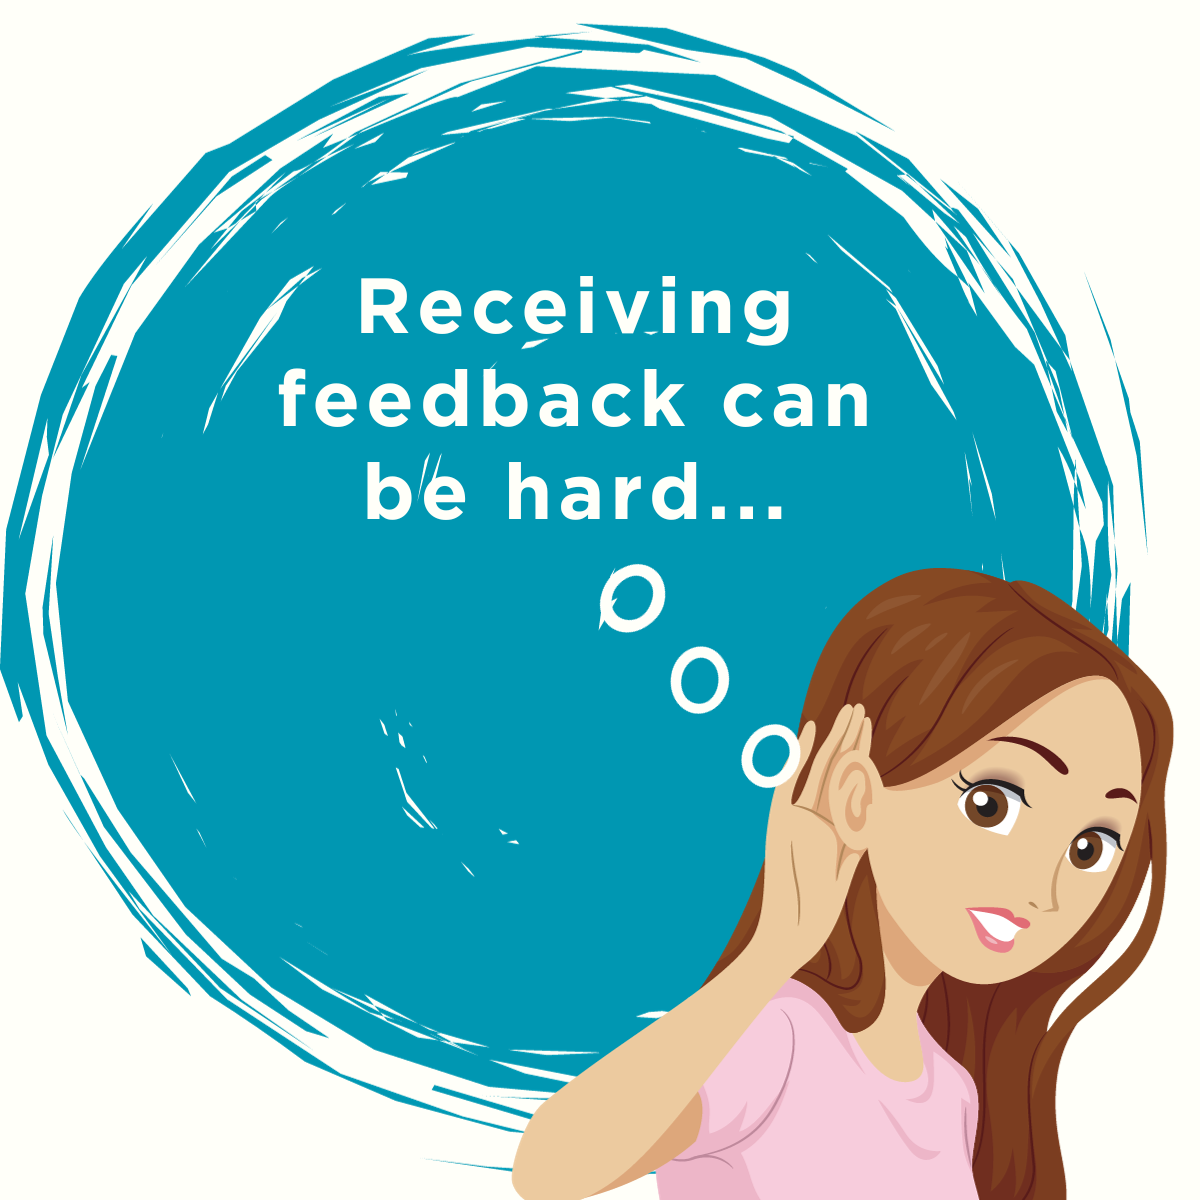 A woman is listening to the words, "Receiving feedback can be hard..."